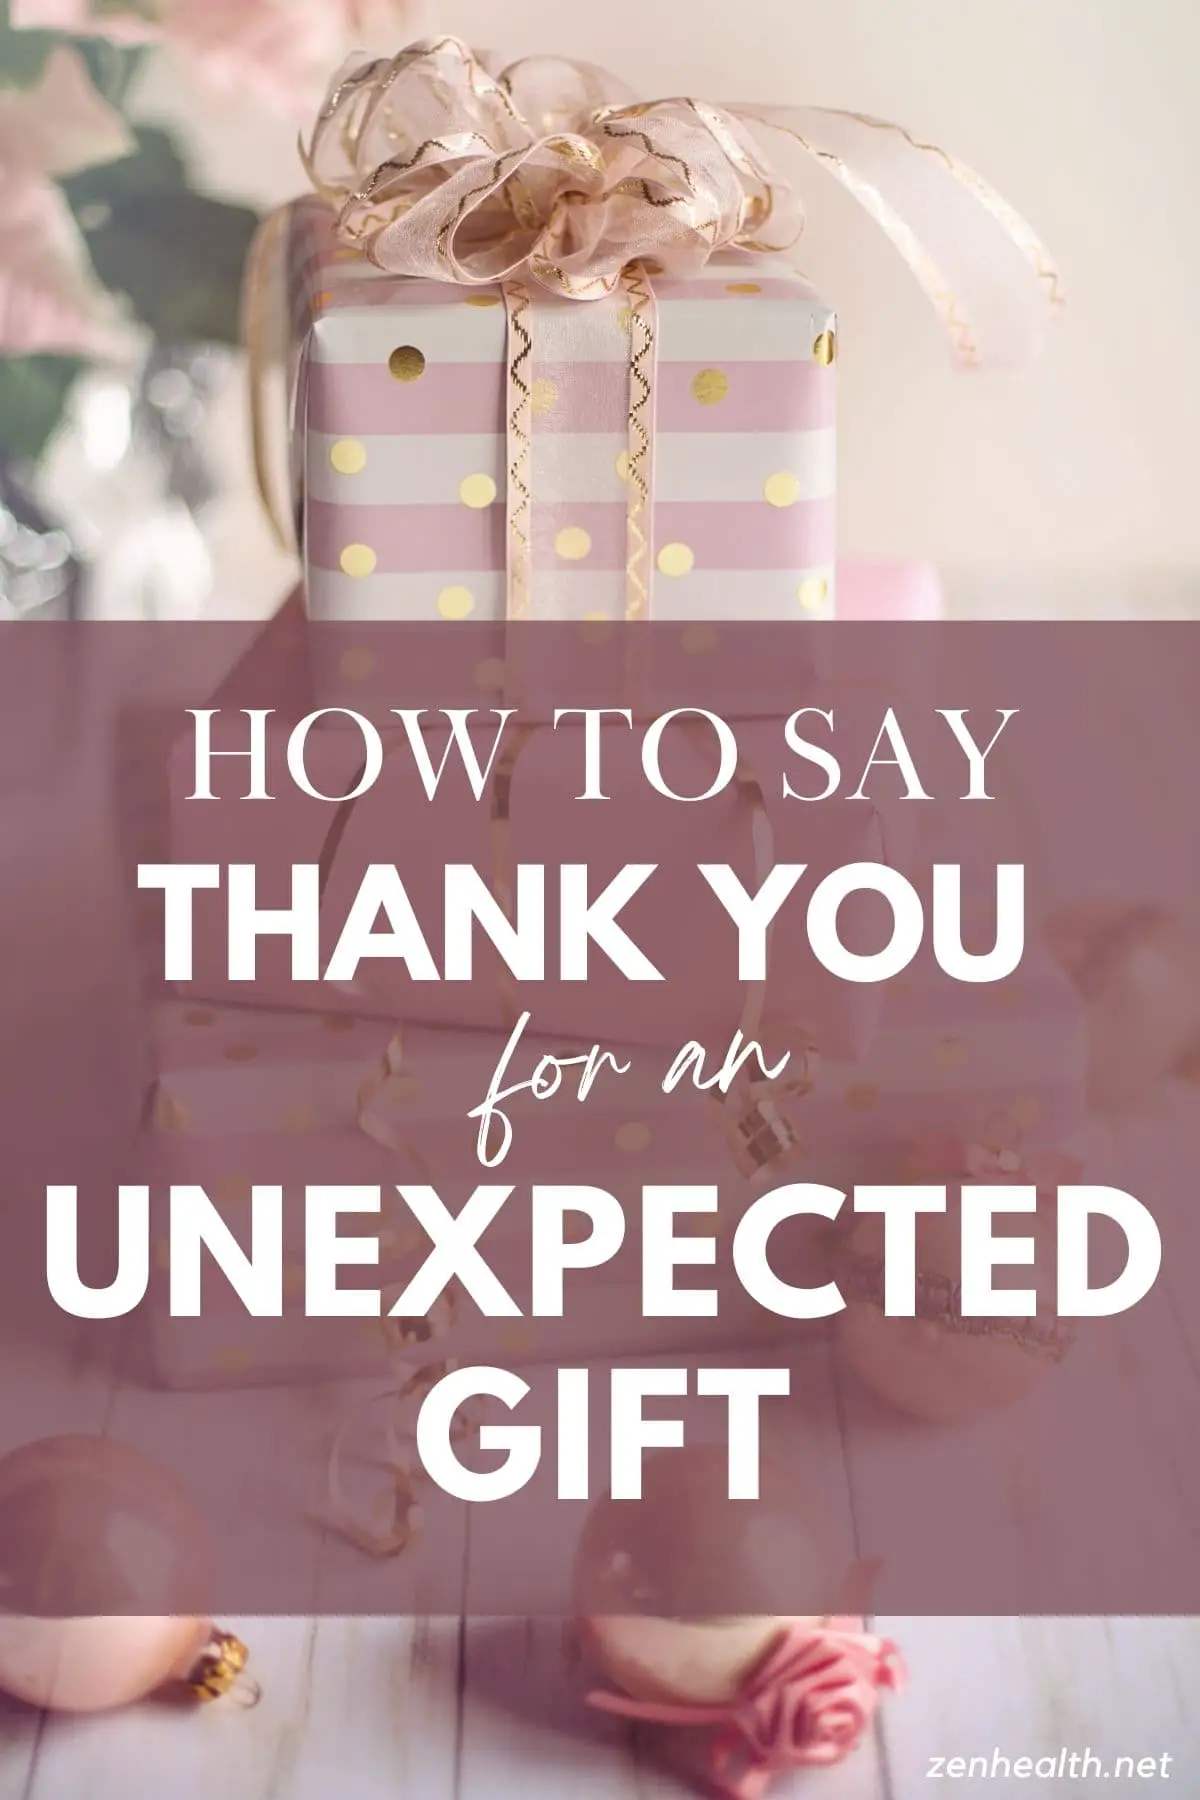 how to say thank you for an unexpected gift messages text overlay on a photo of a stack of gifts in pick tones